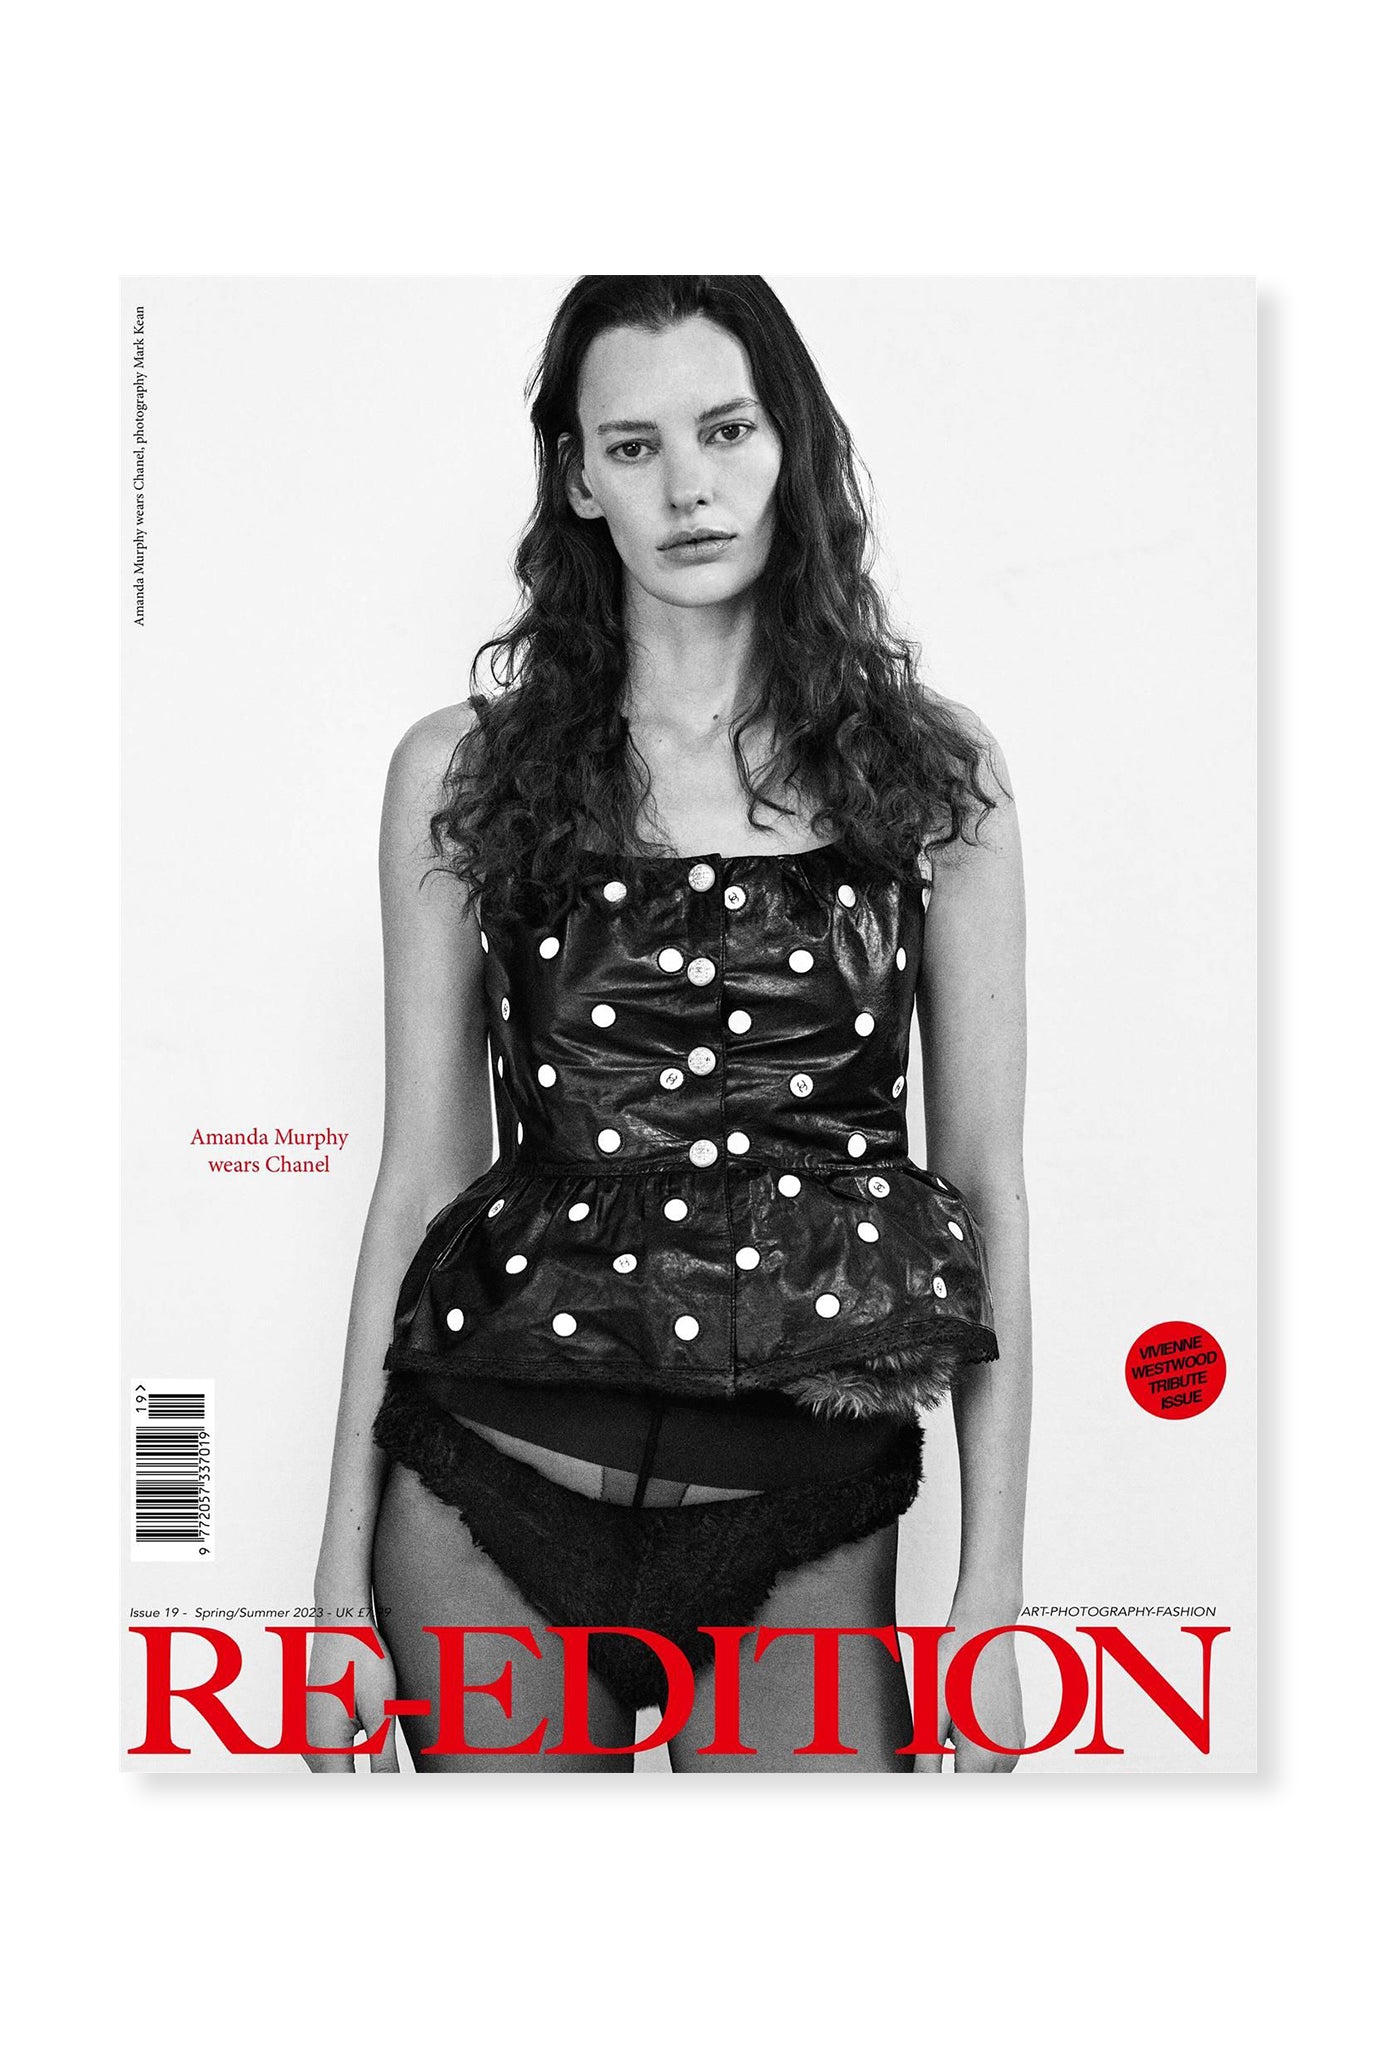 Re-Edition, Issue 19